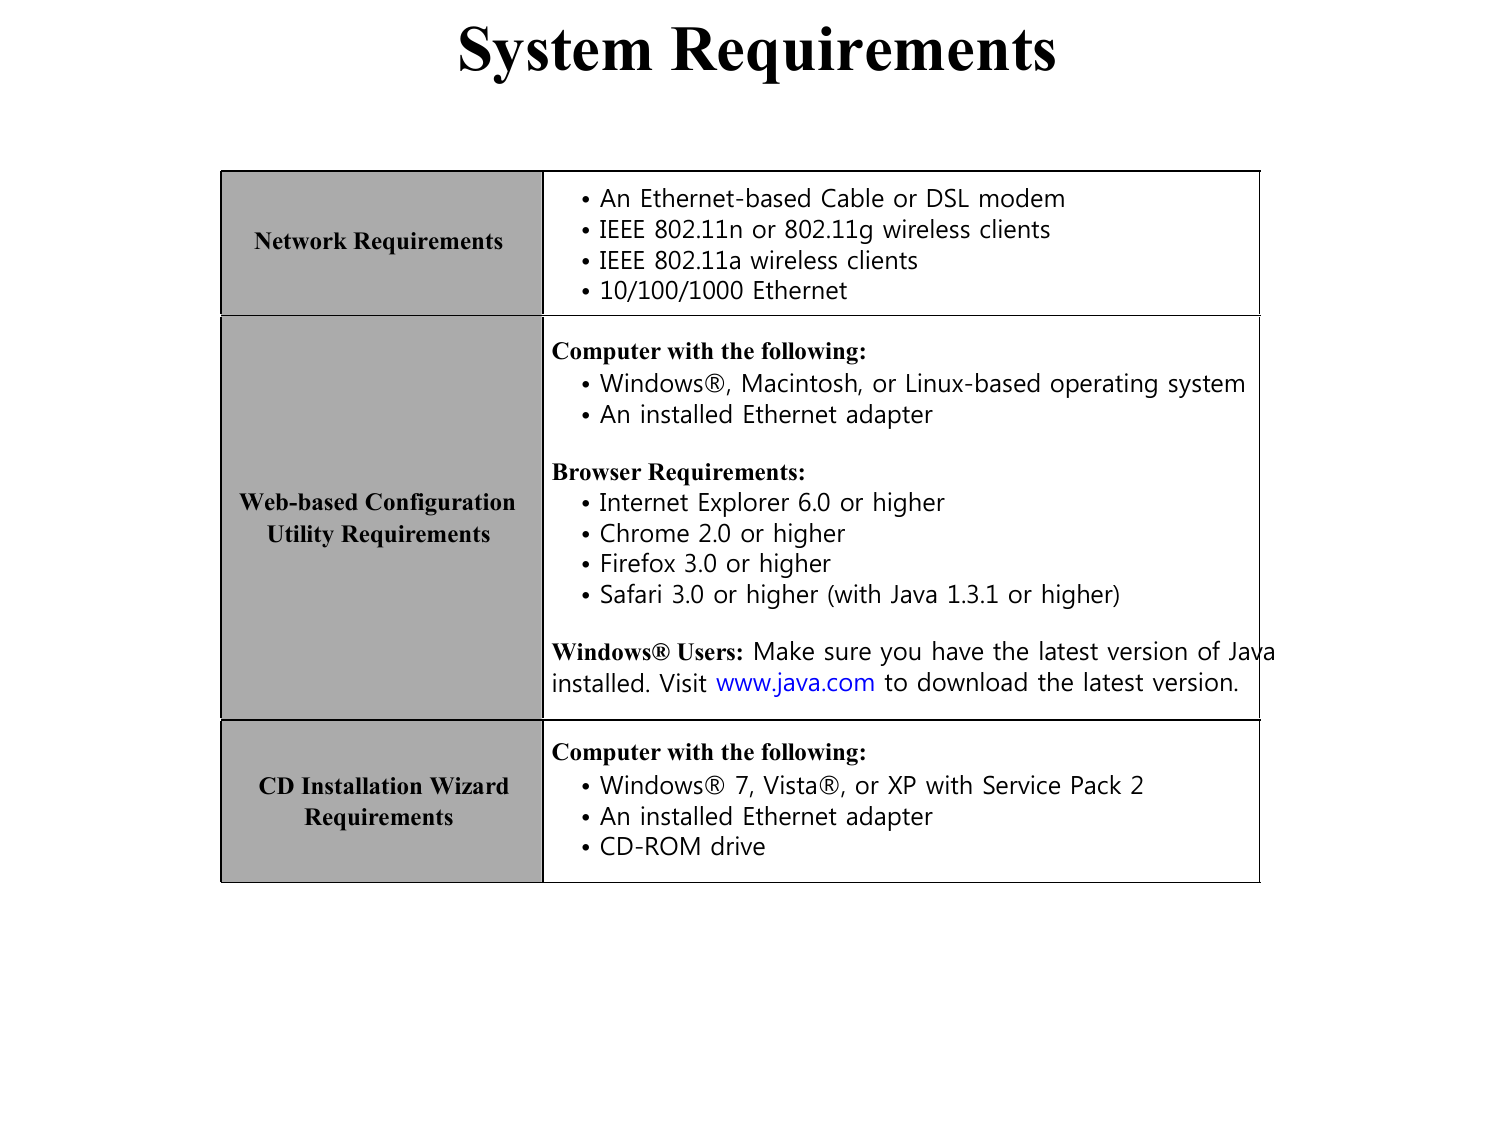    System Requirements     • An Ethernet-based Cable or DSL modem Network Requirements           Web-based Configuration Utility Requirements           CD Installation Wizard Requirements               • IEEE 802.11n or 802.11g wireless clients • IEEE 802.11a wireless clients • 10/100/1000 Ethernet  Computer with the following: • Windows®, Macintosh, or Linux-based operating system • An installed Ethernet adapter  Browser Requirements: • Internet Explorer 6.0 or higher • Chrome 2.0 or higher • Firefox 3.0 or higher • Safari 3.0 or higher (with Java 1.3.1 or higher)  Windows® Users: Make sure you have the latest version of Java installed. Visit www.java.com to download the latest version.  Computer with the following: • Windows® 7, Vista®, or XP with Service Pack 2 • An installed Ethernet adapter • CD-ROM drive                                           